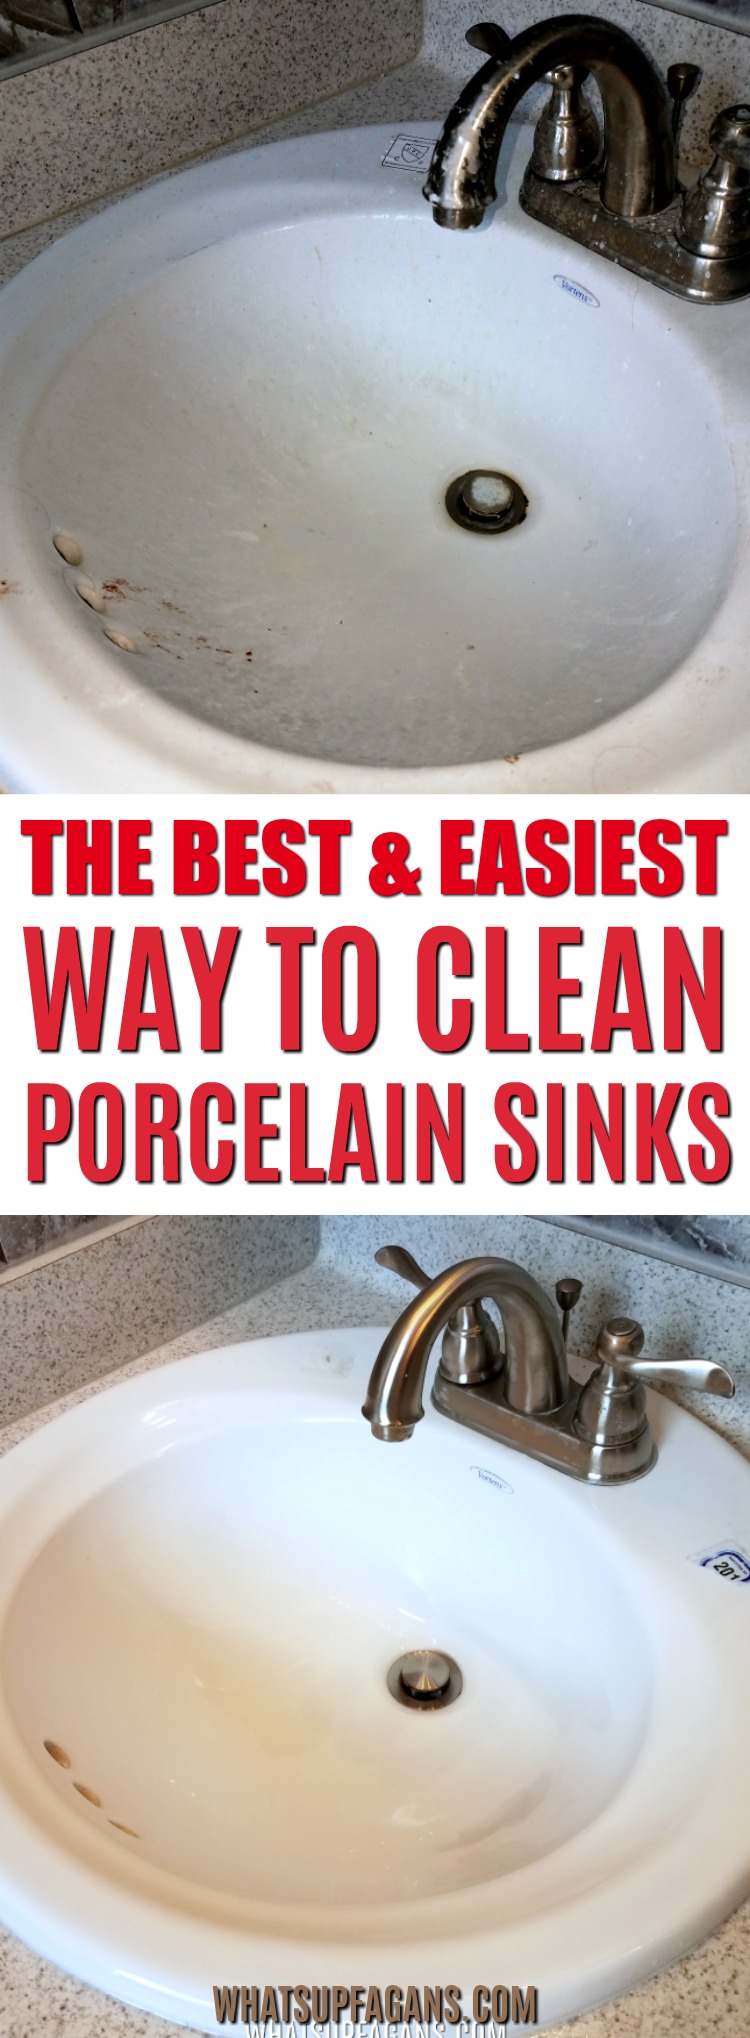 The Easiest and BEST Way to Clean a Porcelain Sink